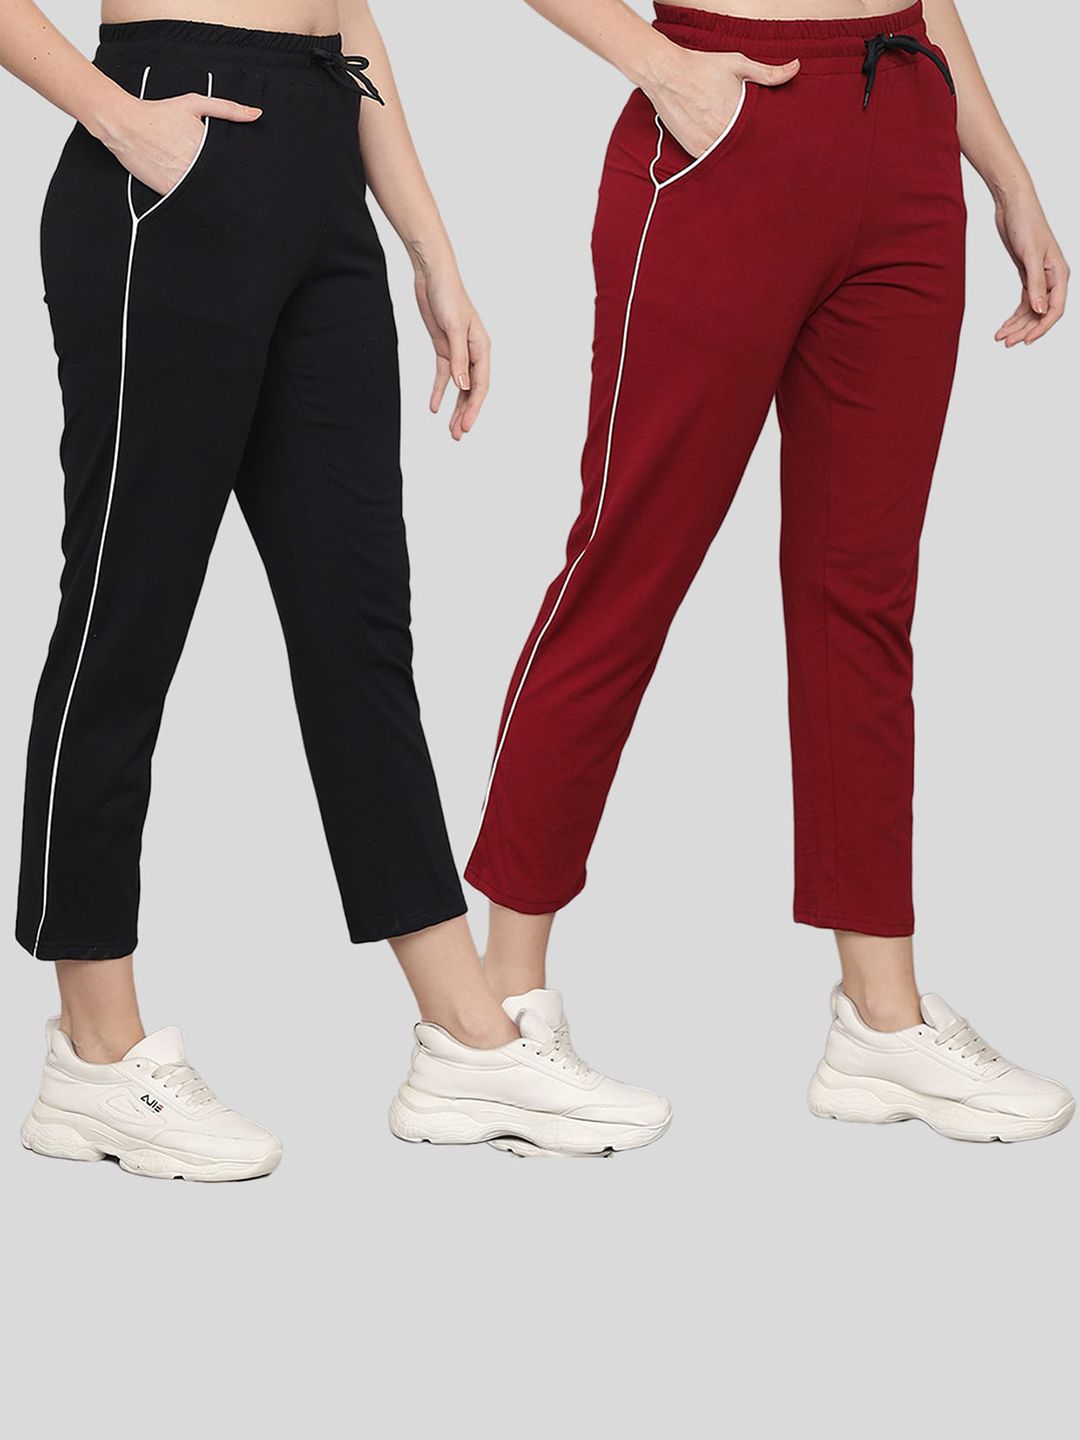 Q-rious Women Pack of 2 Black & Maroon Solid Pure Cotton Track Pants Price in India